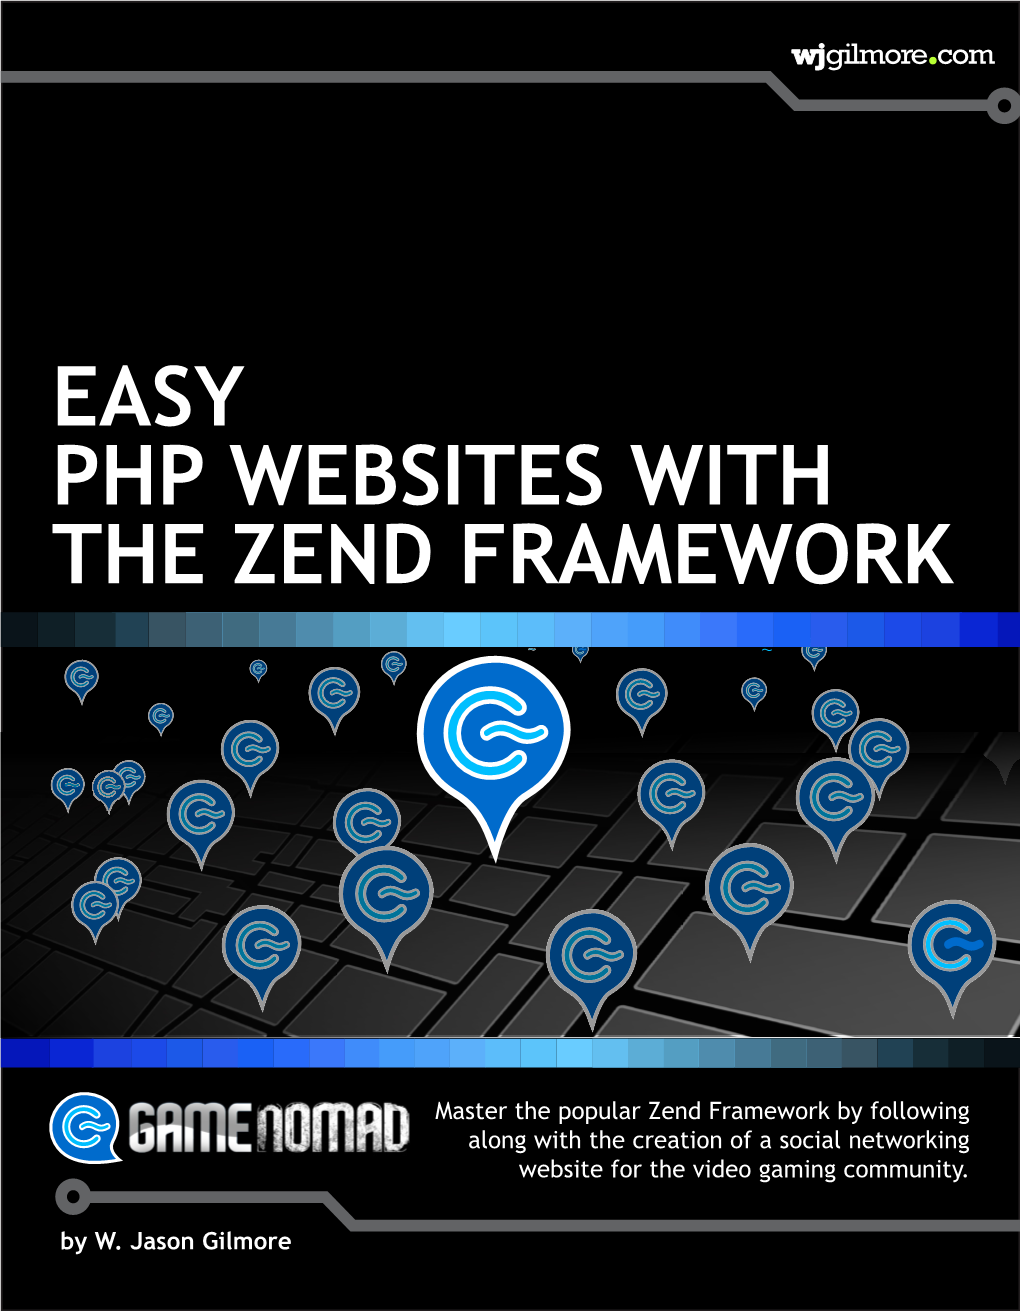 Easy PHP Websites with the Zend Framework (W. Jason Gilmore